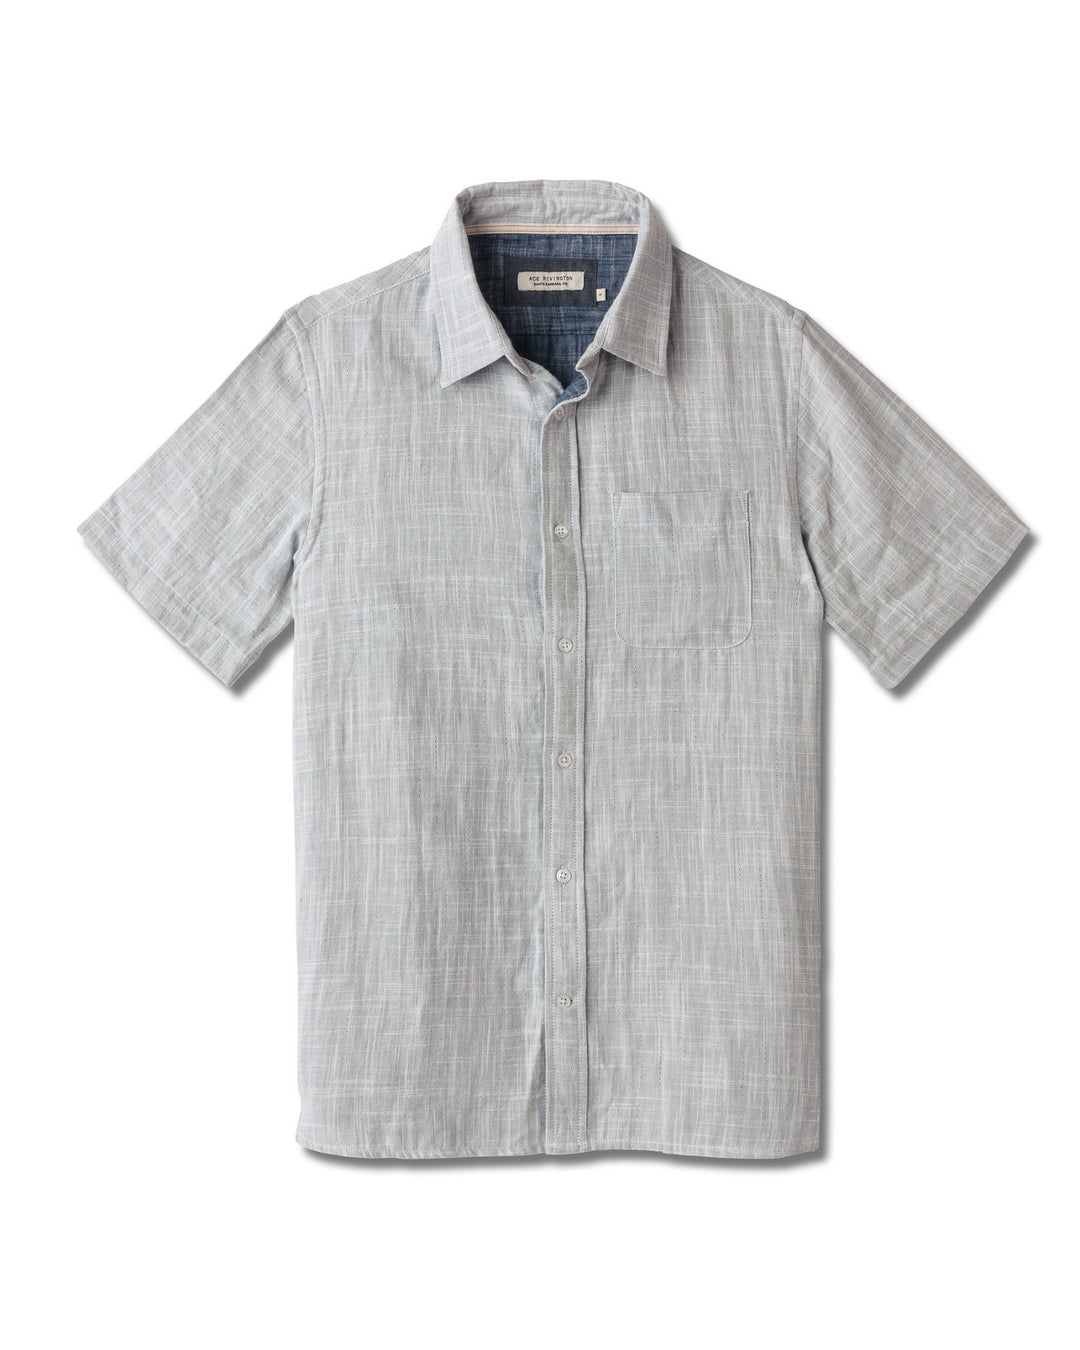 Front of full-view flat lay of Ace Rivington collared grey short-sleeved double gauze soft-textured cotton shirt with indigo blue interior, pearl buttons, and left-breast pocket